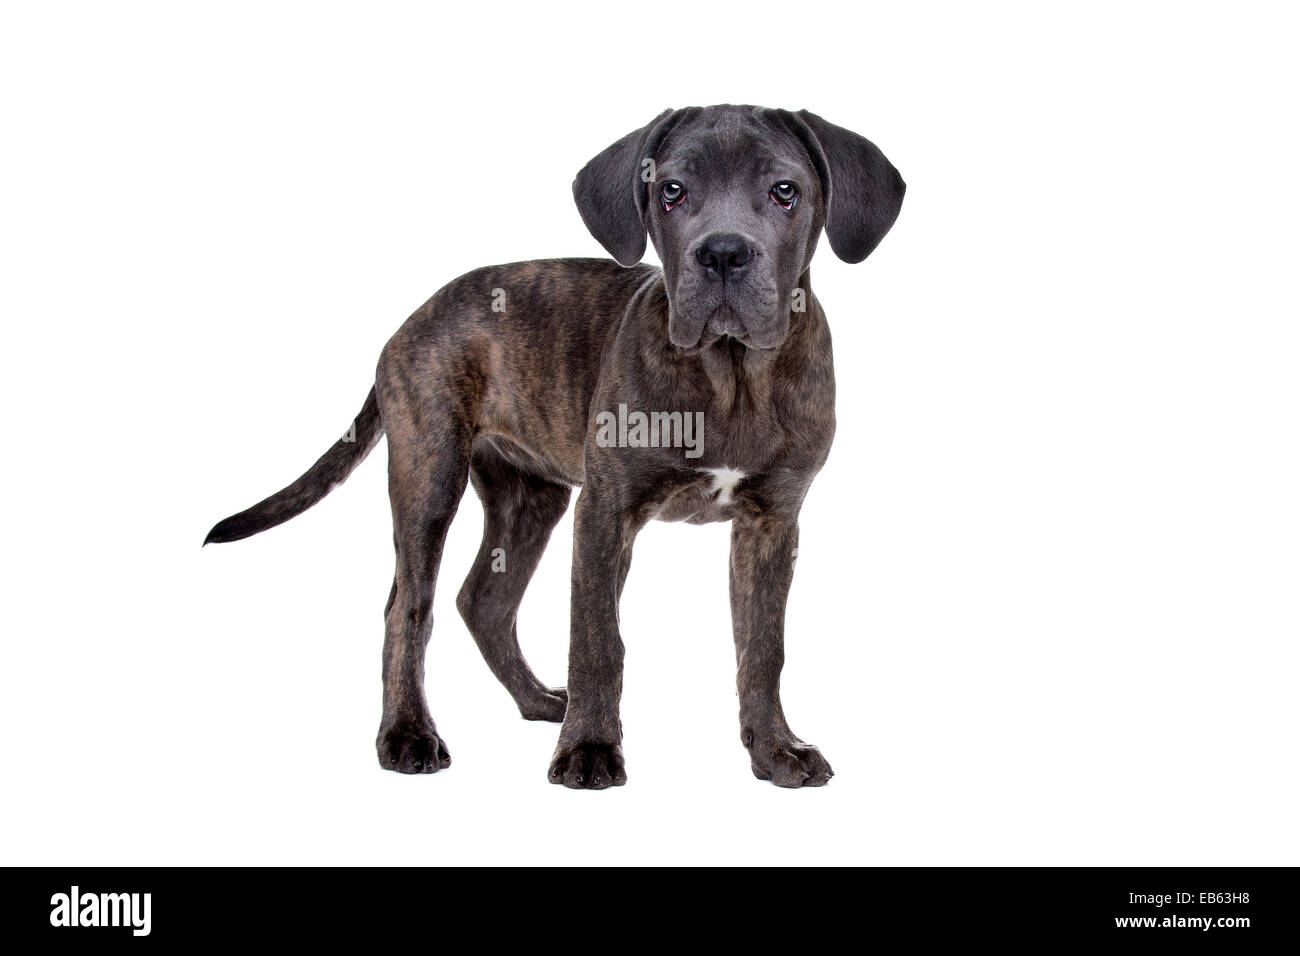 grey cane corso puppy dog standing in front of a white background Stock Photo